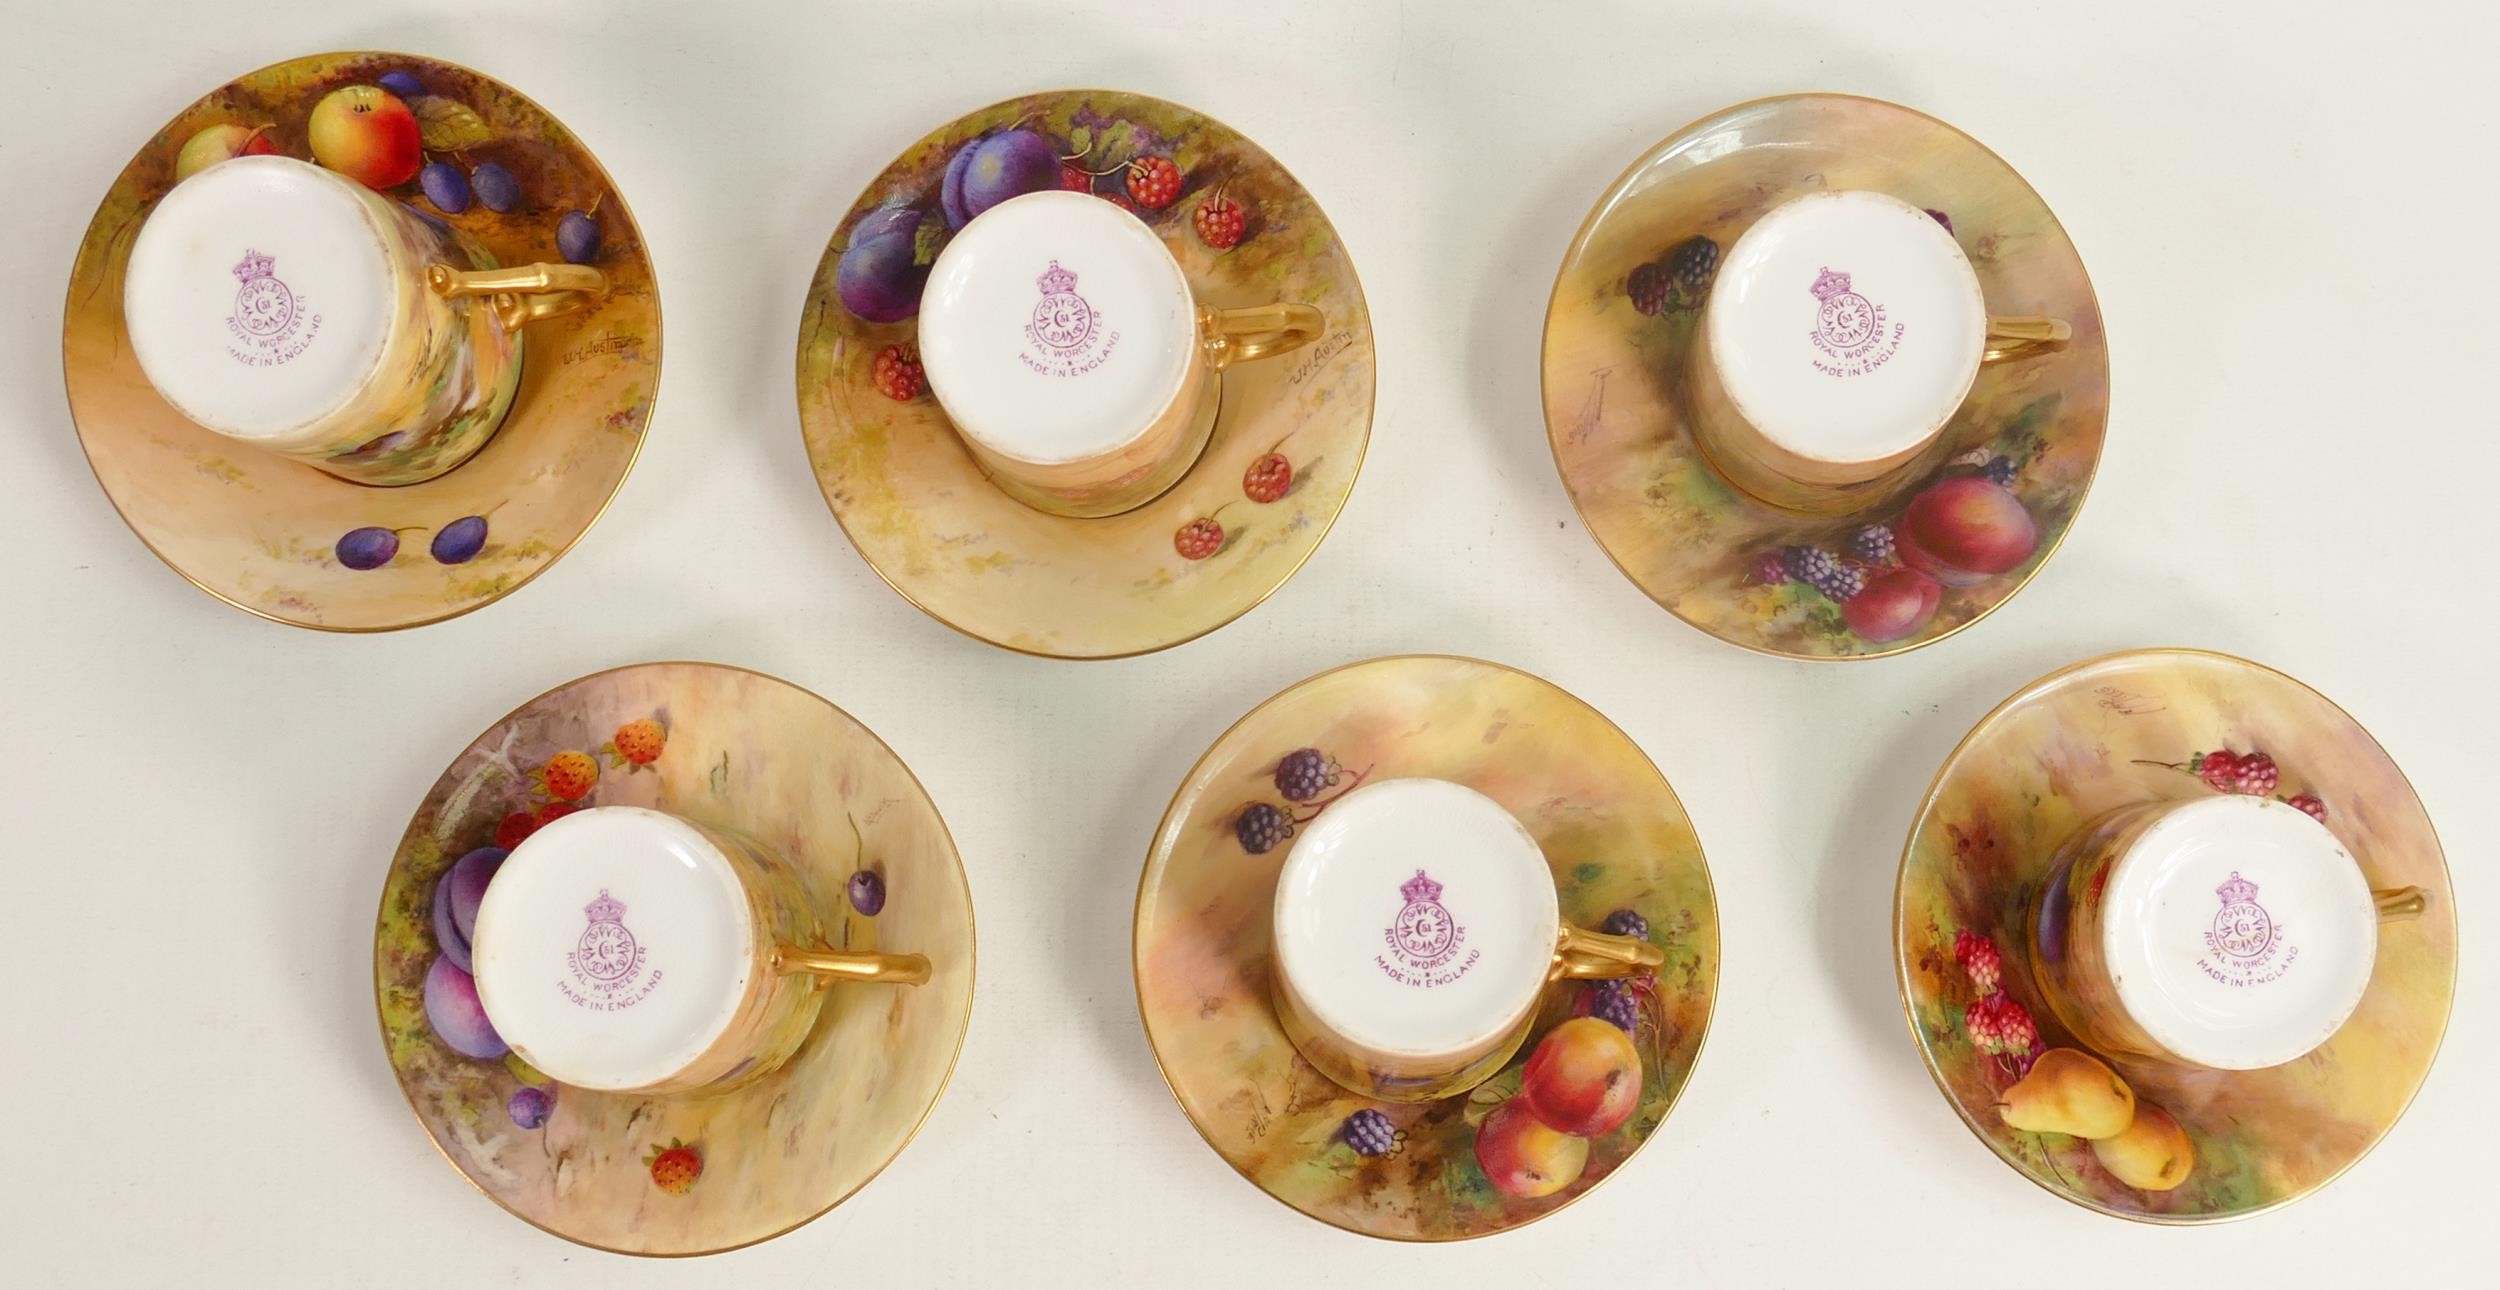 Royal Worcester set of coffee cans and saucers, hand painted with fruit by various artists including - Image 2 of 3